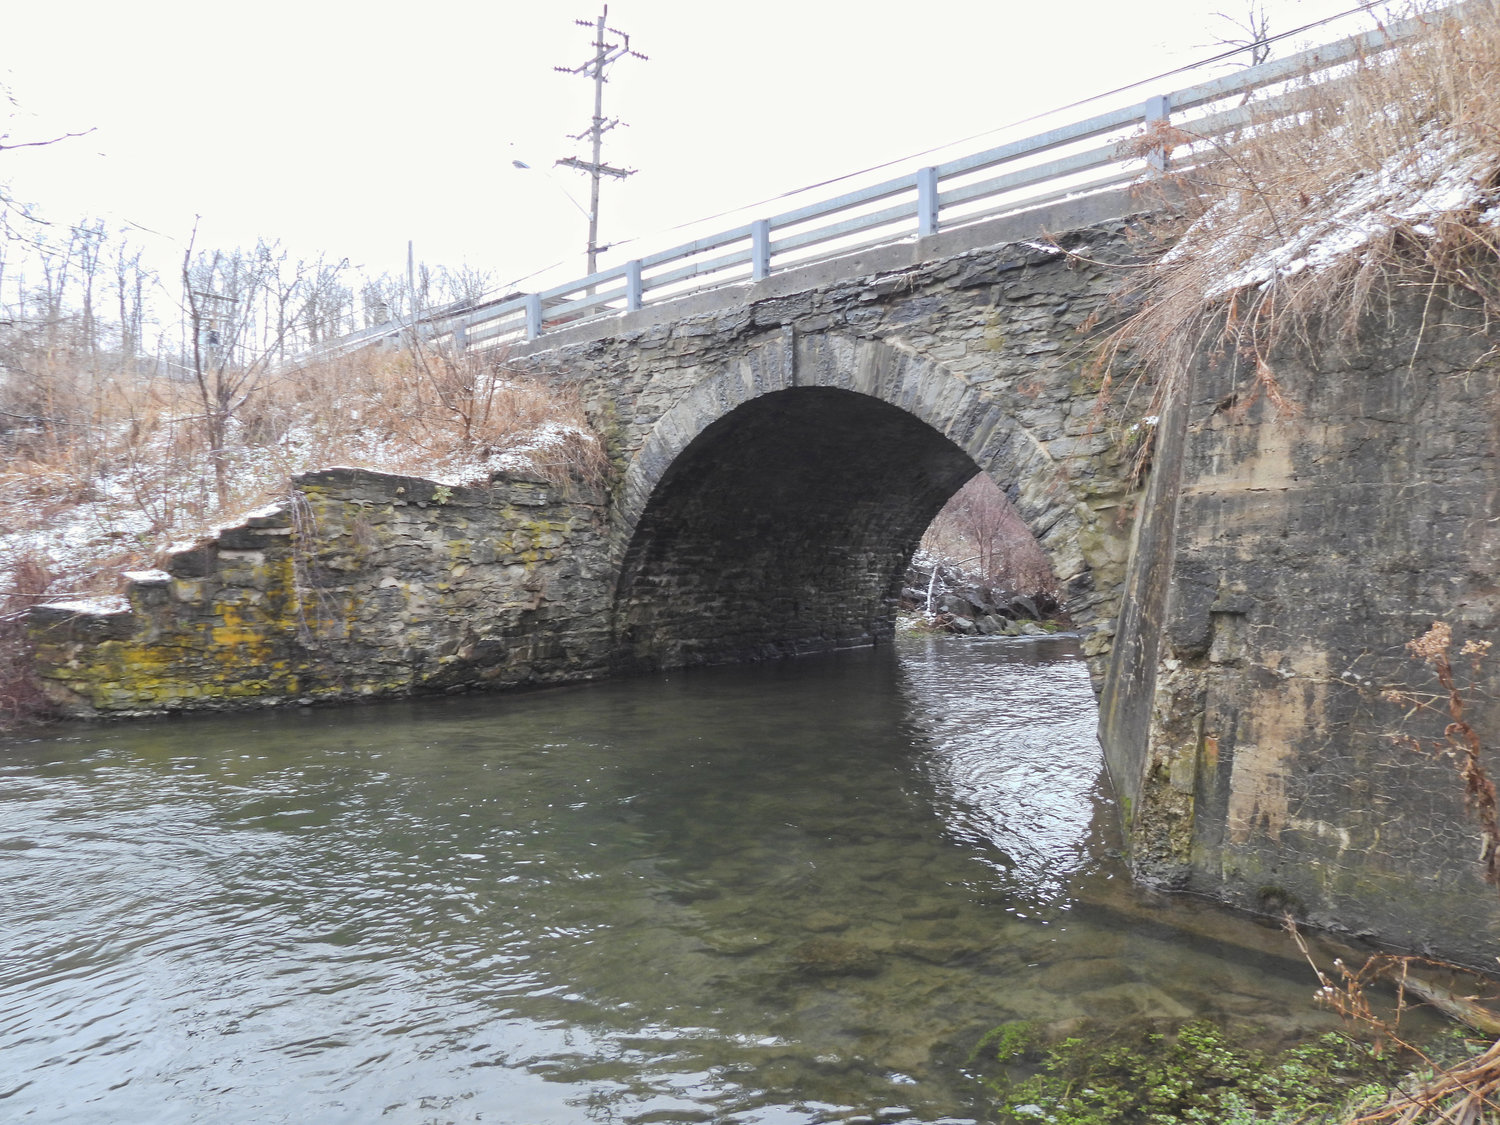 BRIDGE WORK — The bridge on Solsville Road in Madison will receive rehabilitation after the Madison County Highway Department was awarded $2,175,000 from the Bridge NY project.